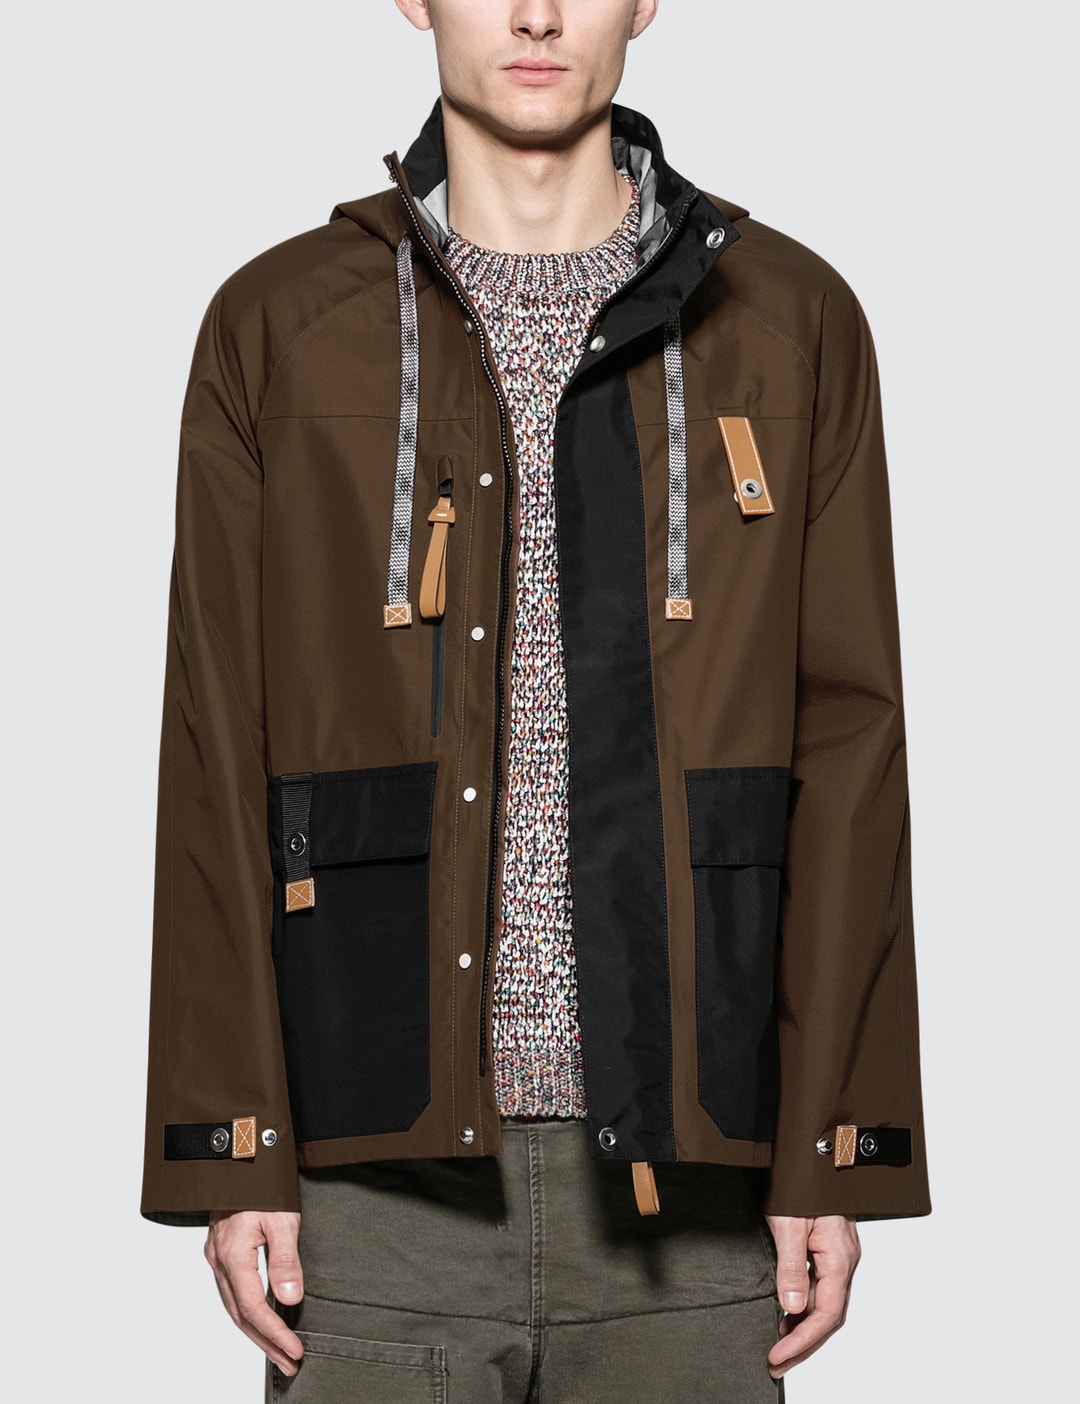 Loewe - Parka | HBX - Globally Curated Fashion and Lifestyle by Hypebeast